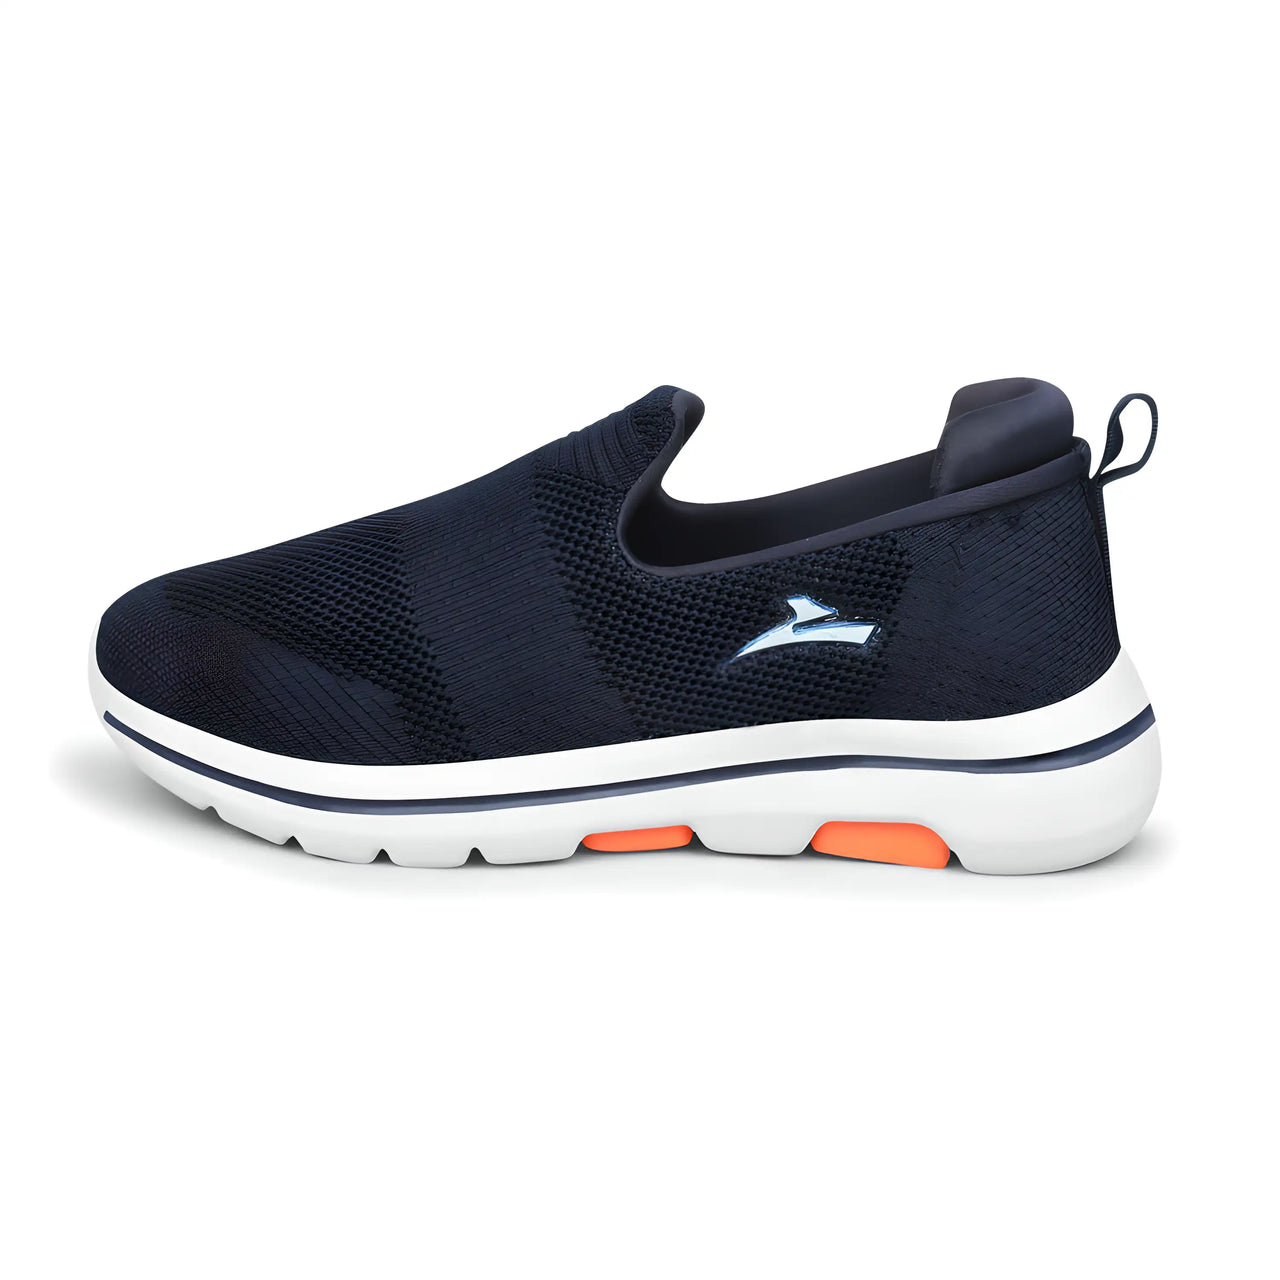 Men's Synthetic Stylish Casual Shoes